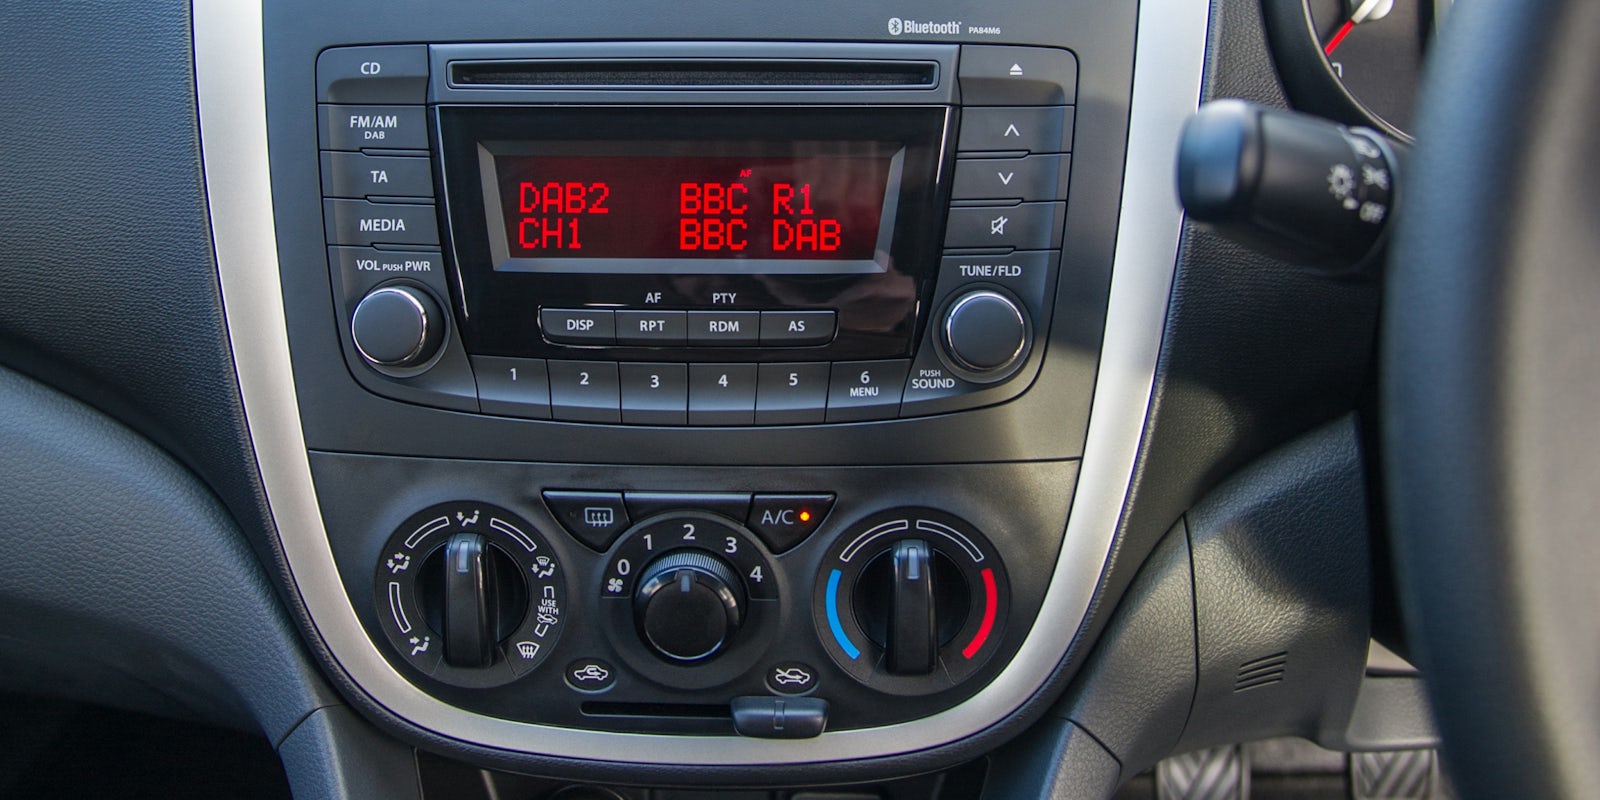 What the dashboard lacks in style and quality, it more than makes up for with ease of use